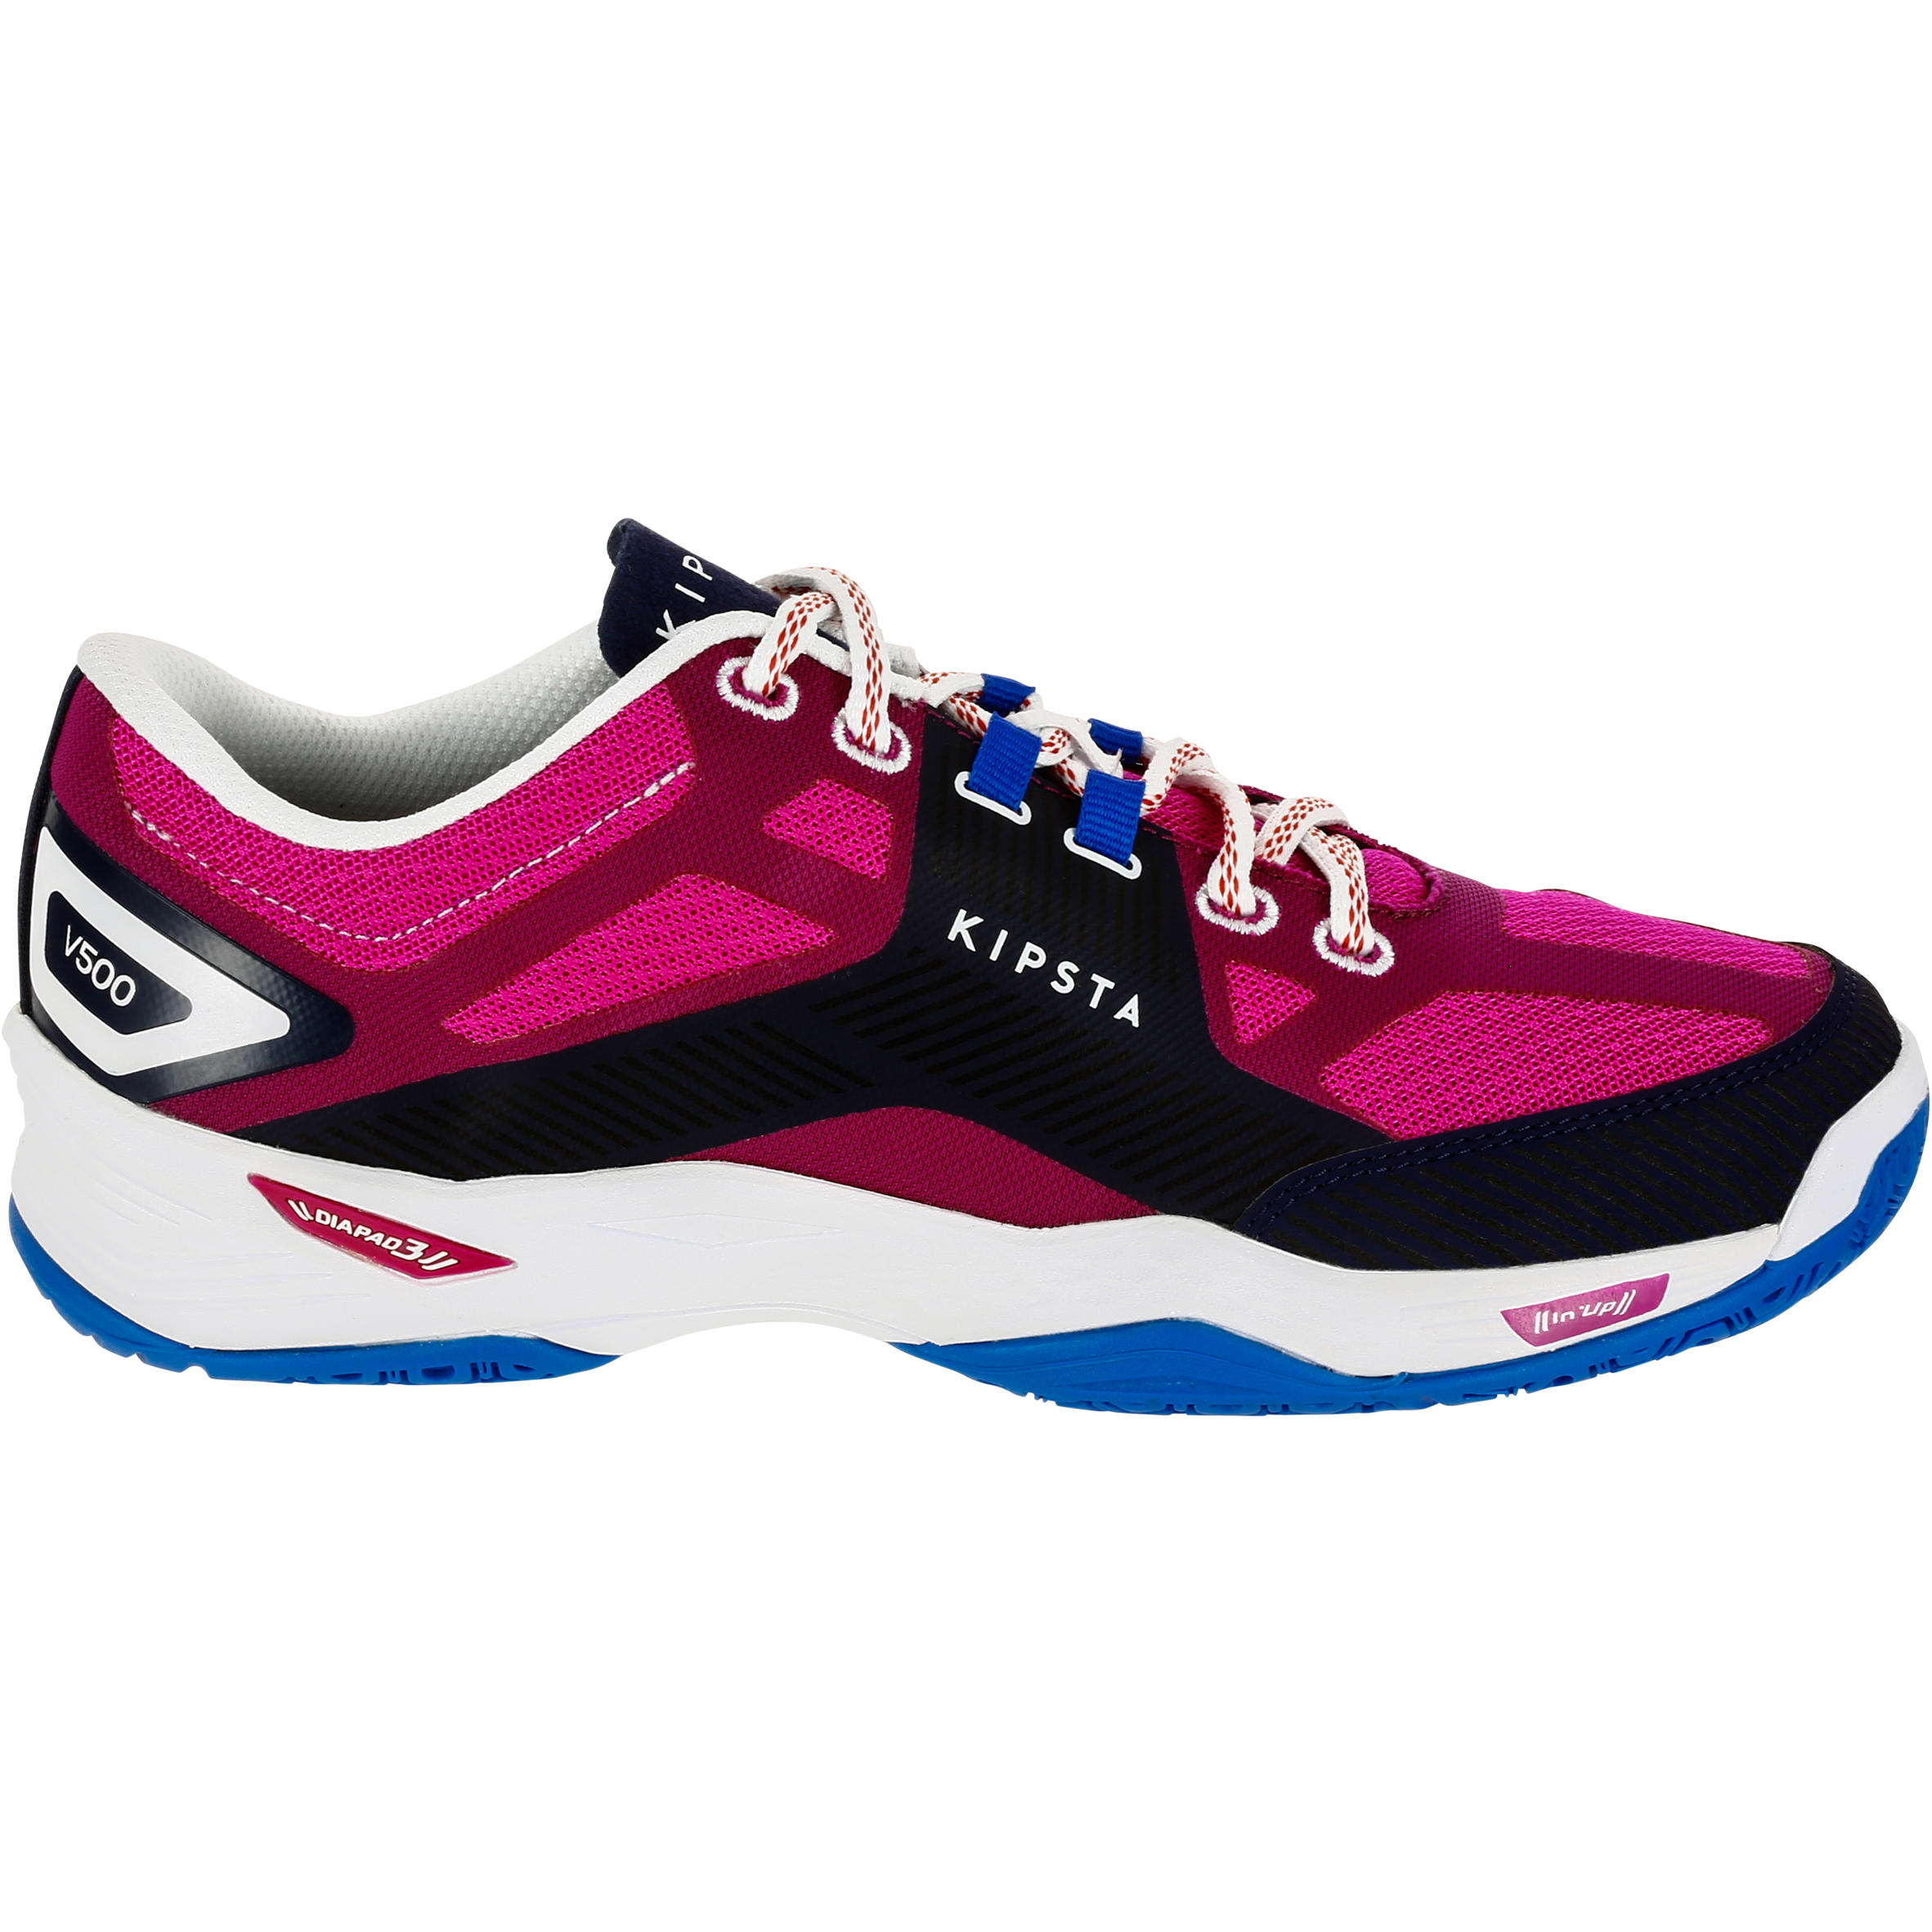 V500 Women's Volleyball Shoes - Blue 